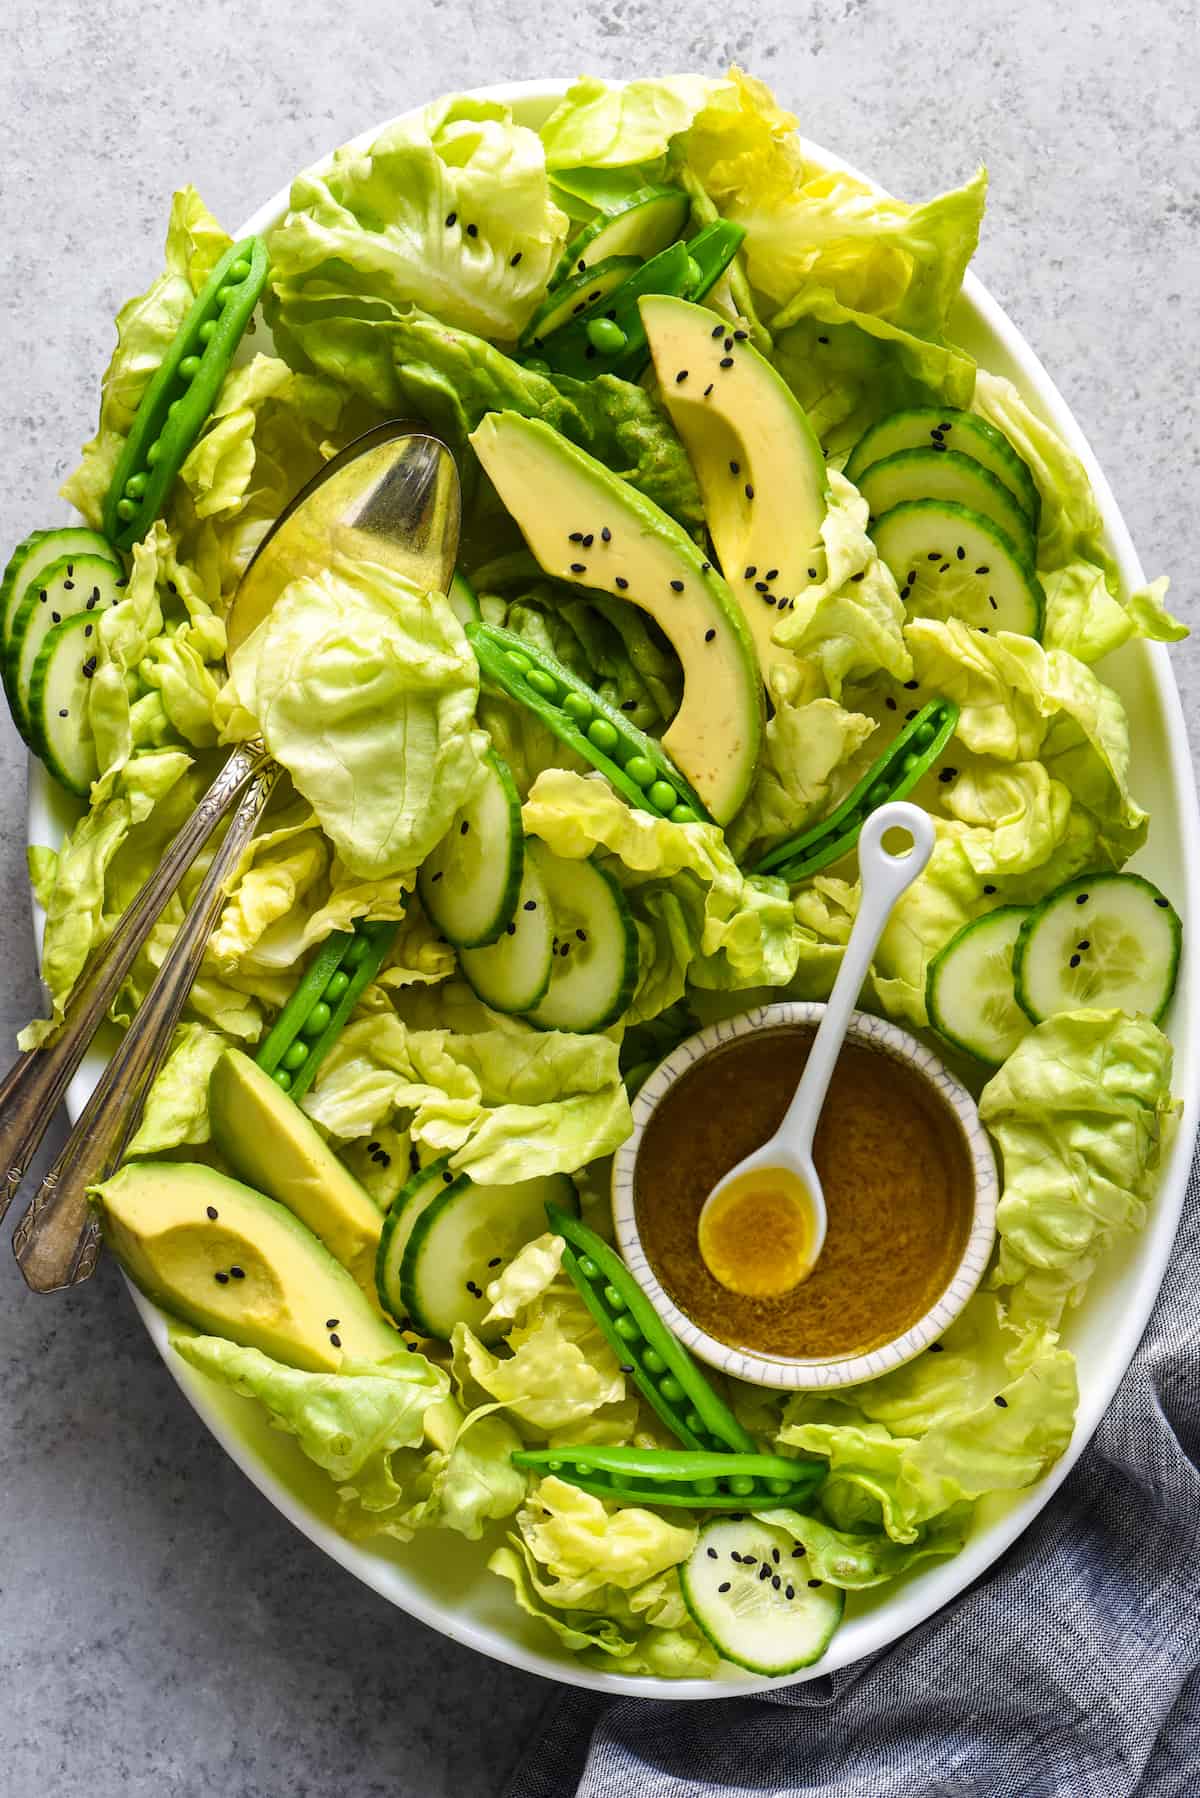 Large platter of green salad with lettuce, avocado, cucumber and peas, and a small bowl of brown salad dressing.